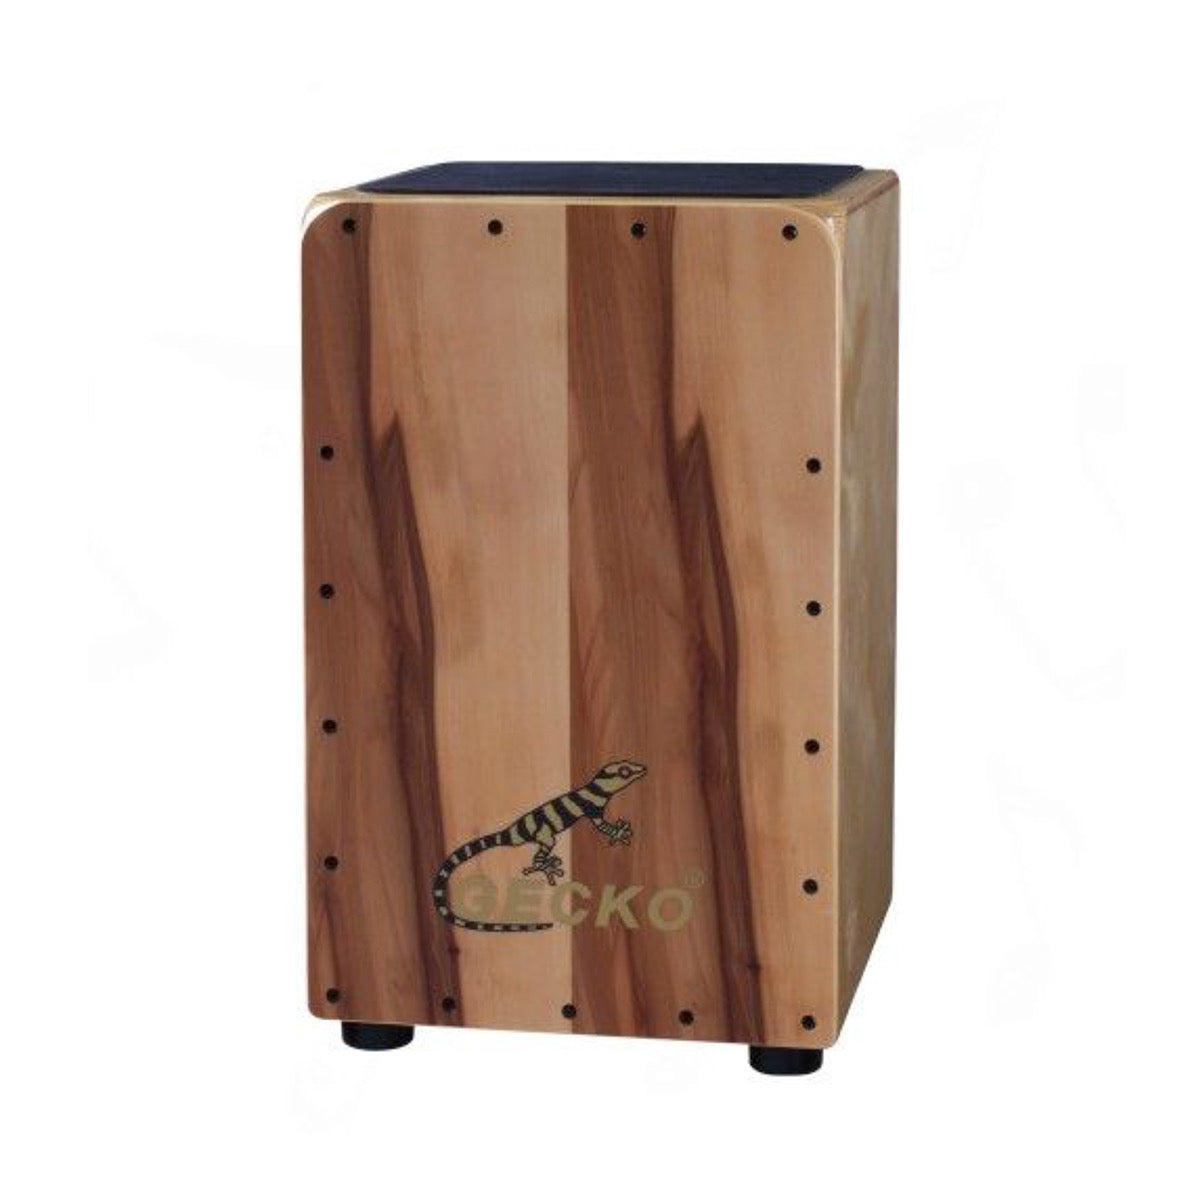 Gecko Cajon Drum applewood CL19AP w/Backpack Wooden Percussion Box, with Internal Guitar Strings